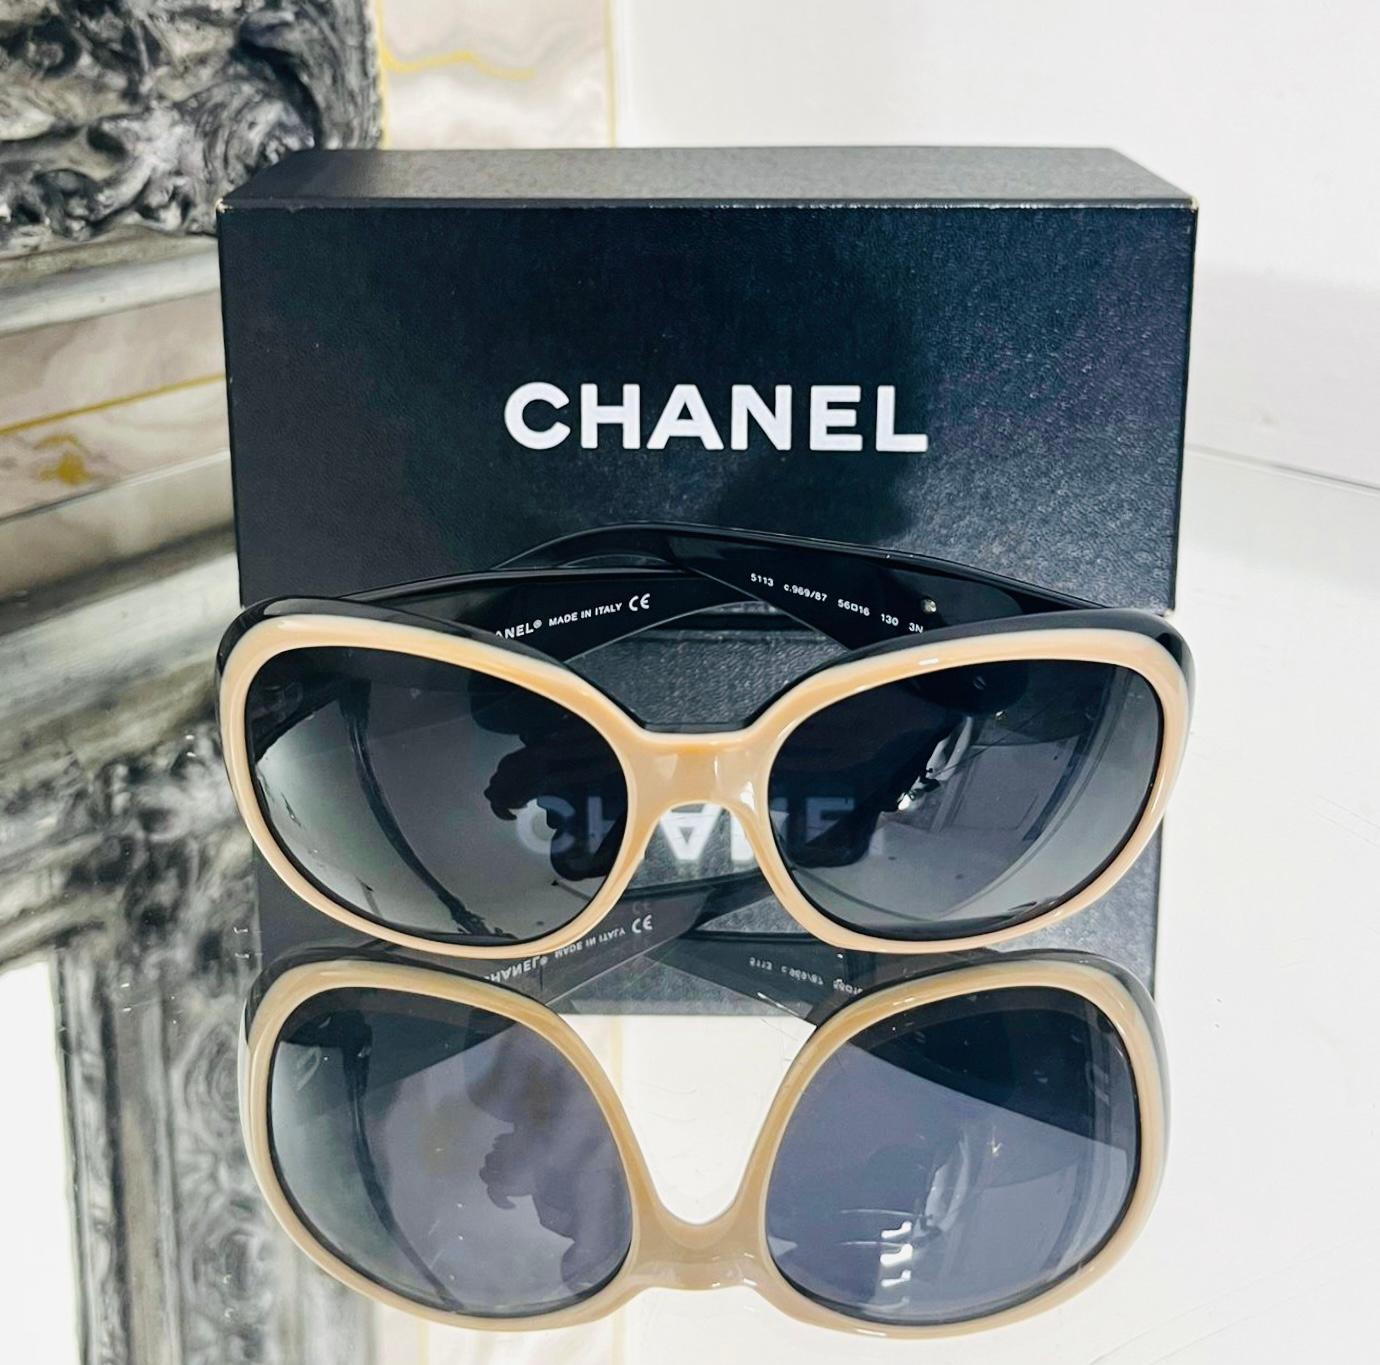 Chanel Camelia 'CC' Logo Sunglasses

Round shaped sunglasses designed in nude and black.

Detailed with black Camelia flowers and 'CC' logo embellishments to the wide arms.

Featuring grey tinted lenses.

Size – One Size

Condition – Very